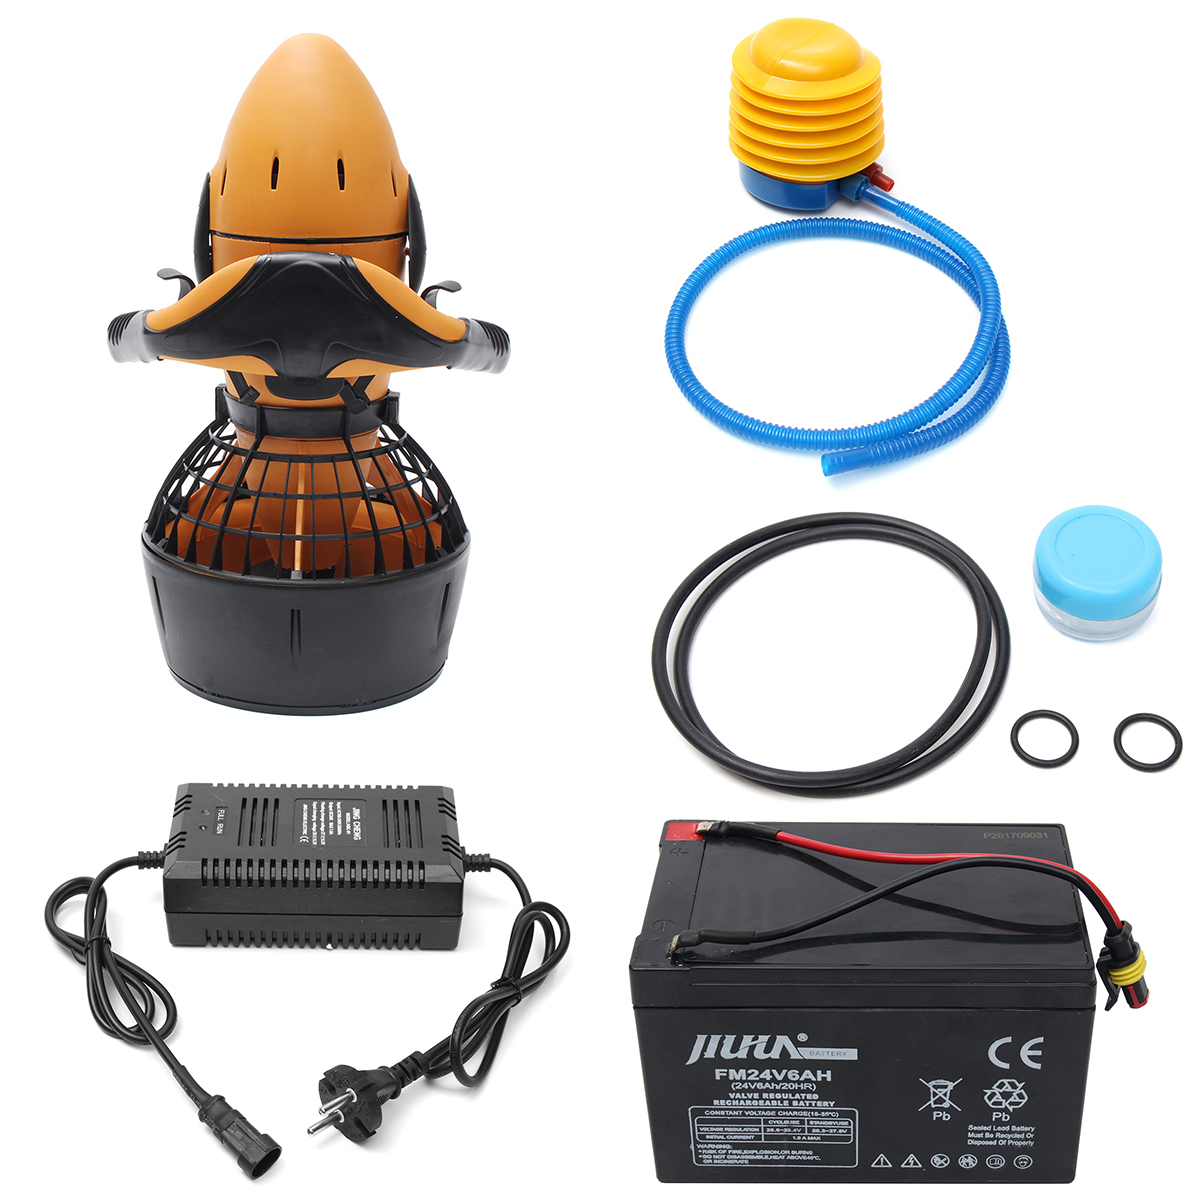 300W-Electric-Sea-Scooter-Diving-Equipment-Underwater-Propeller-Diving-Pool-Scooter-for-Swimming-1289088